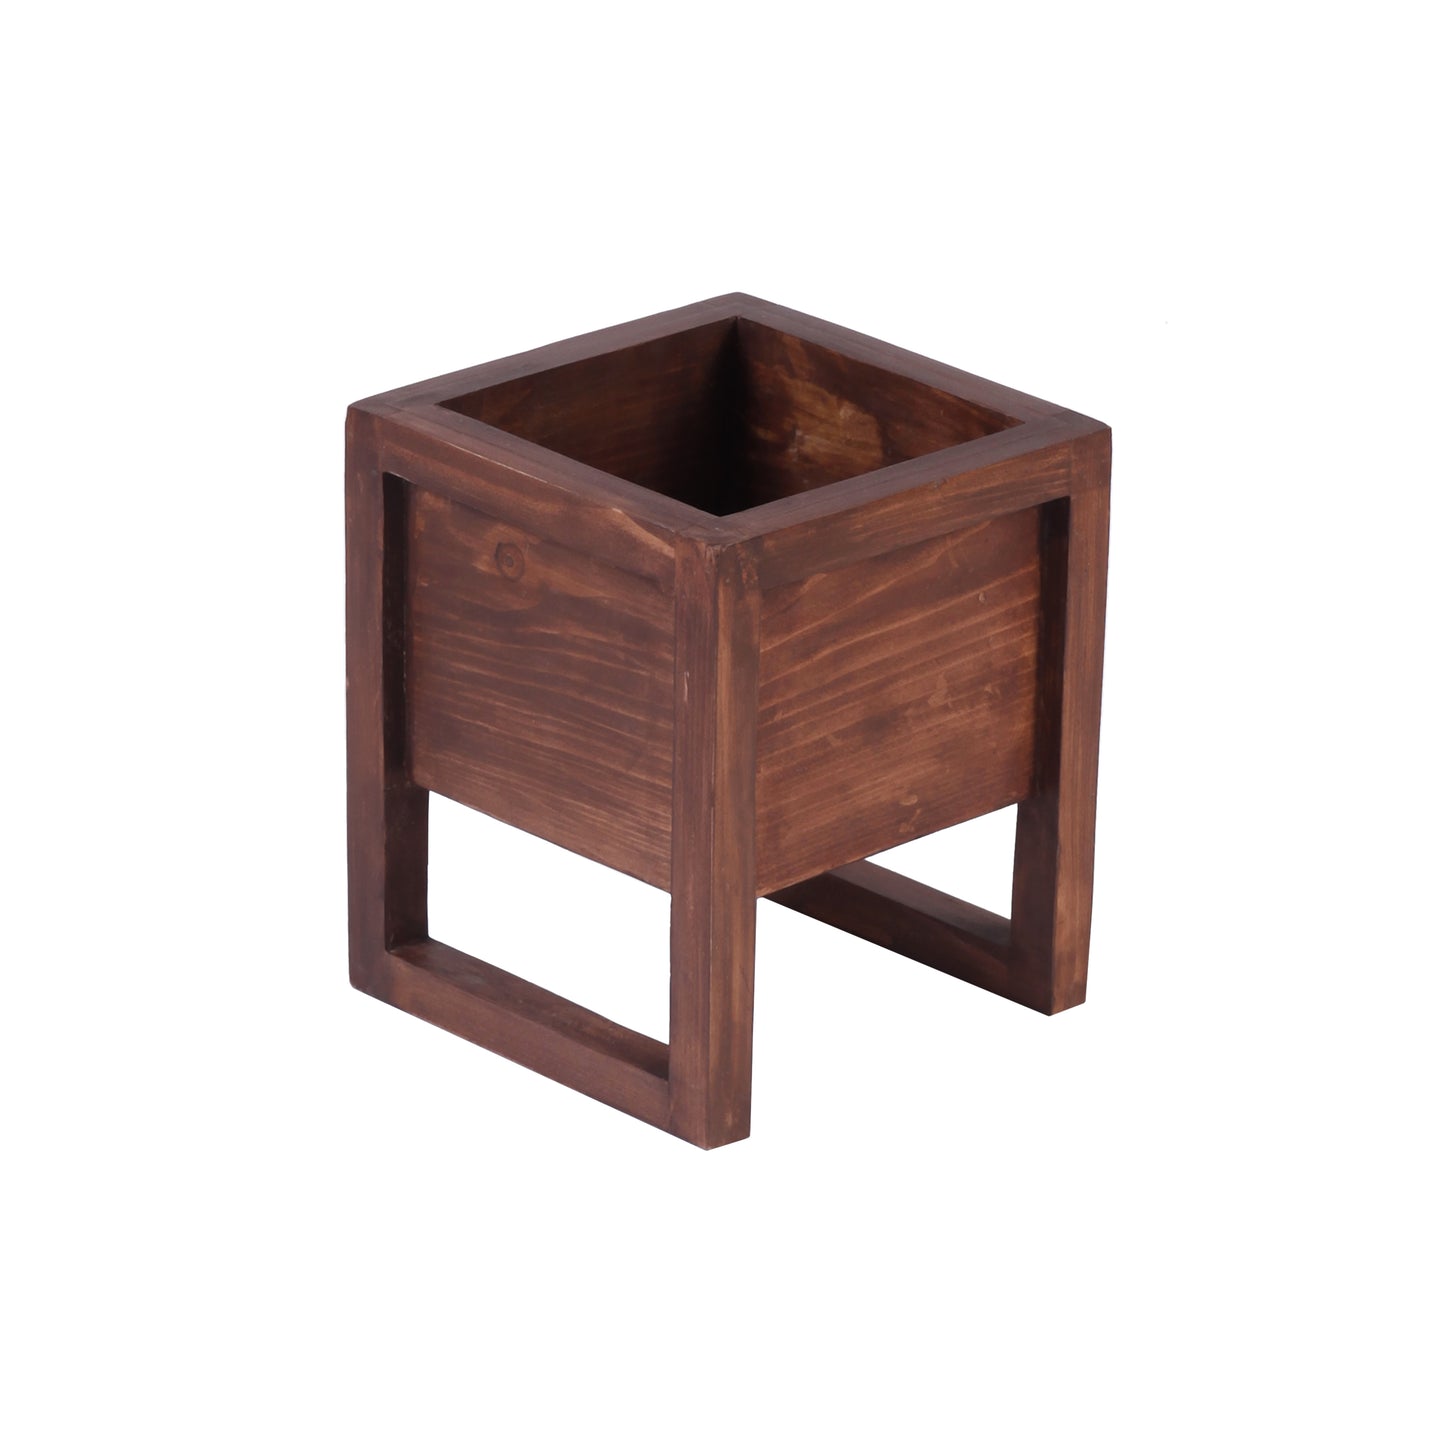 A Tiny Mistake Crate Wooden Planter (One Piece) (Dark Finish)